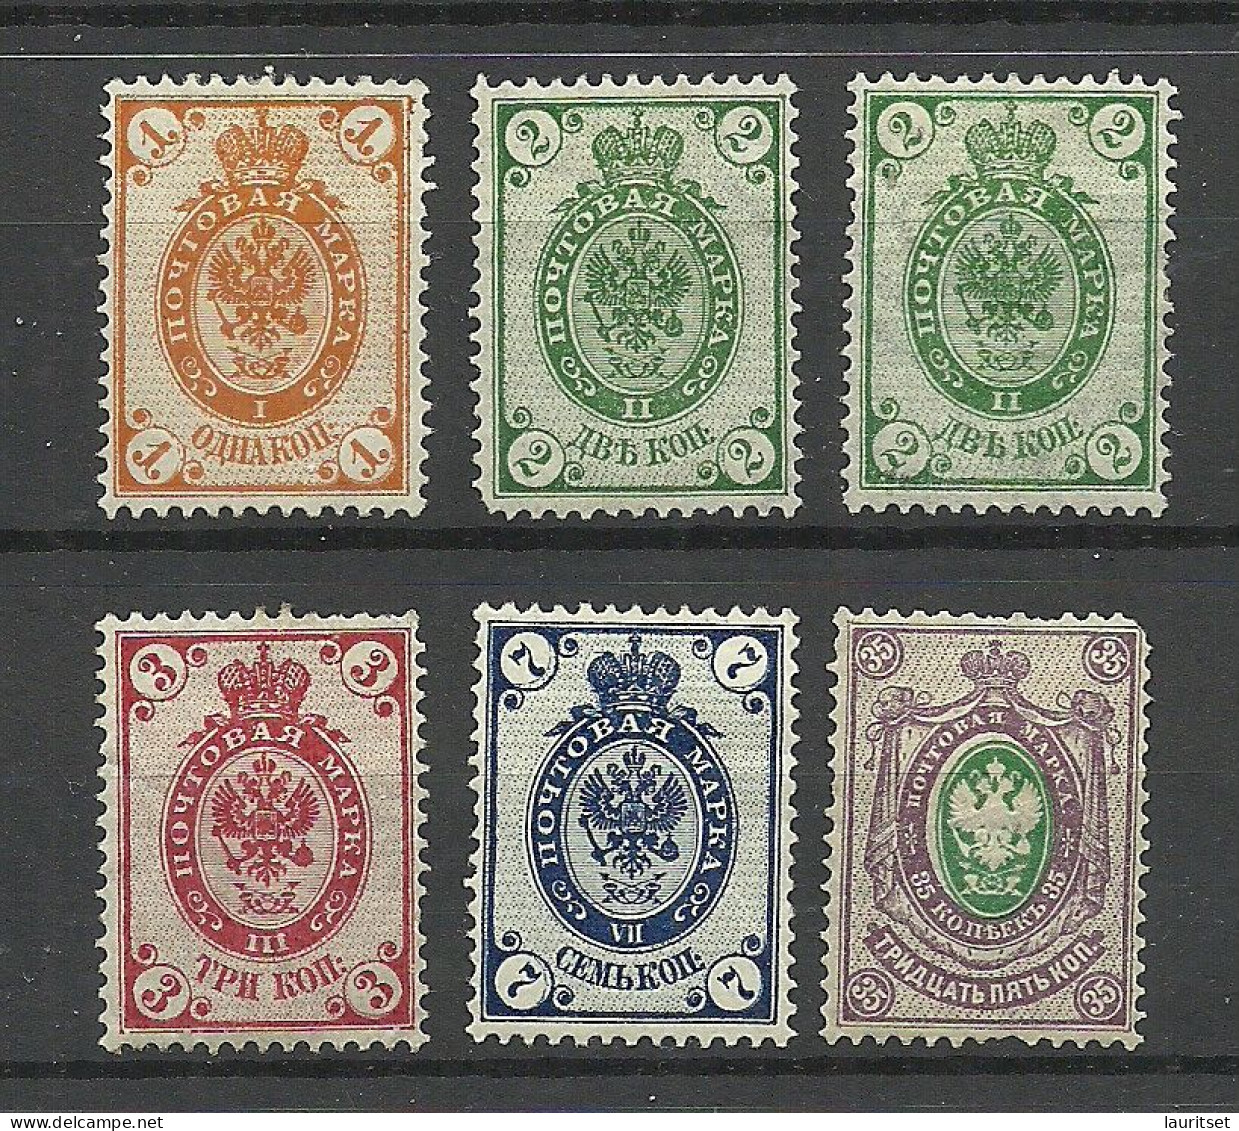 Russland Russia 1889-1904 Coat Of Arms, 6 Stamps, * - Nuevos